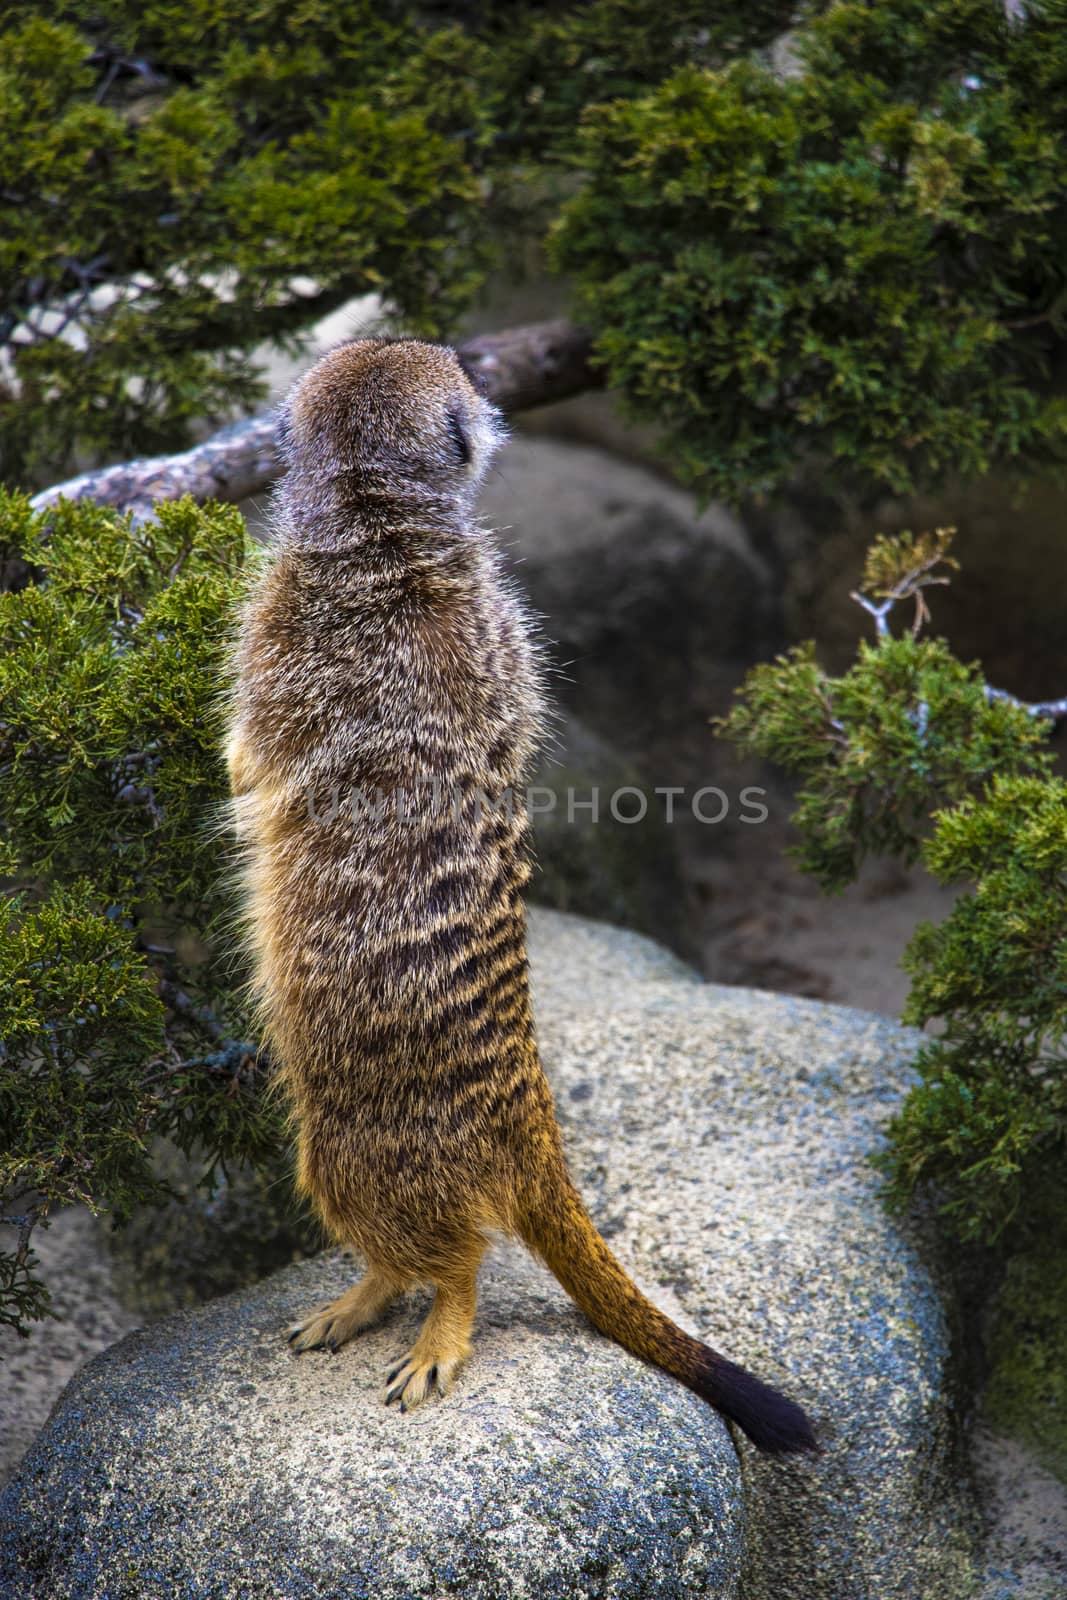 Meerkat stands on its hind legs and looks up. by kip02kas